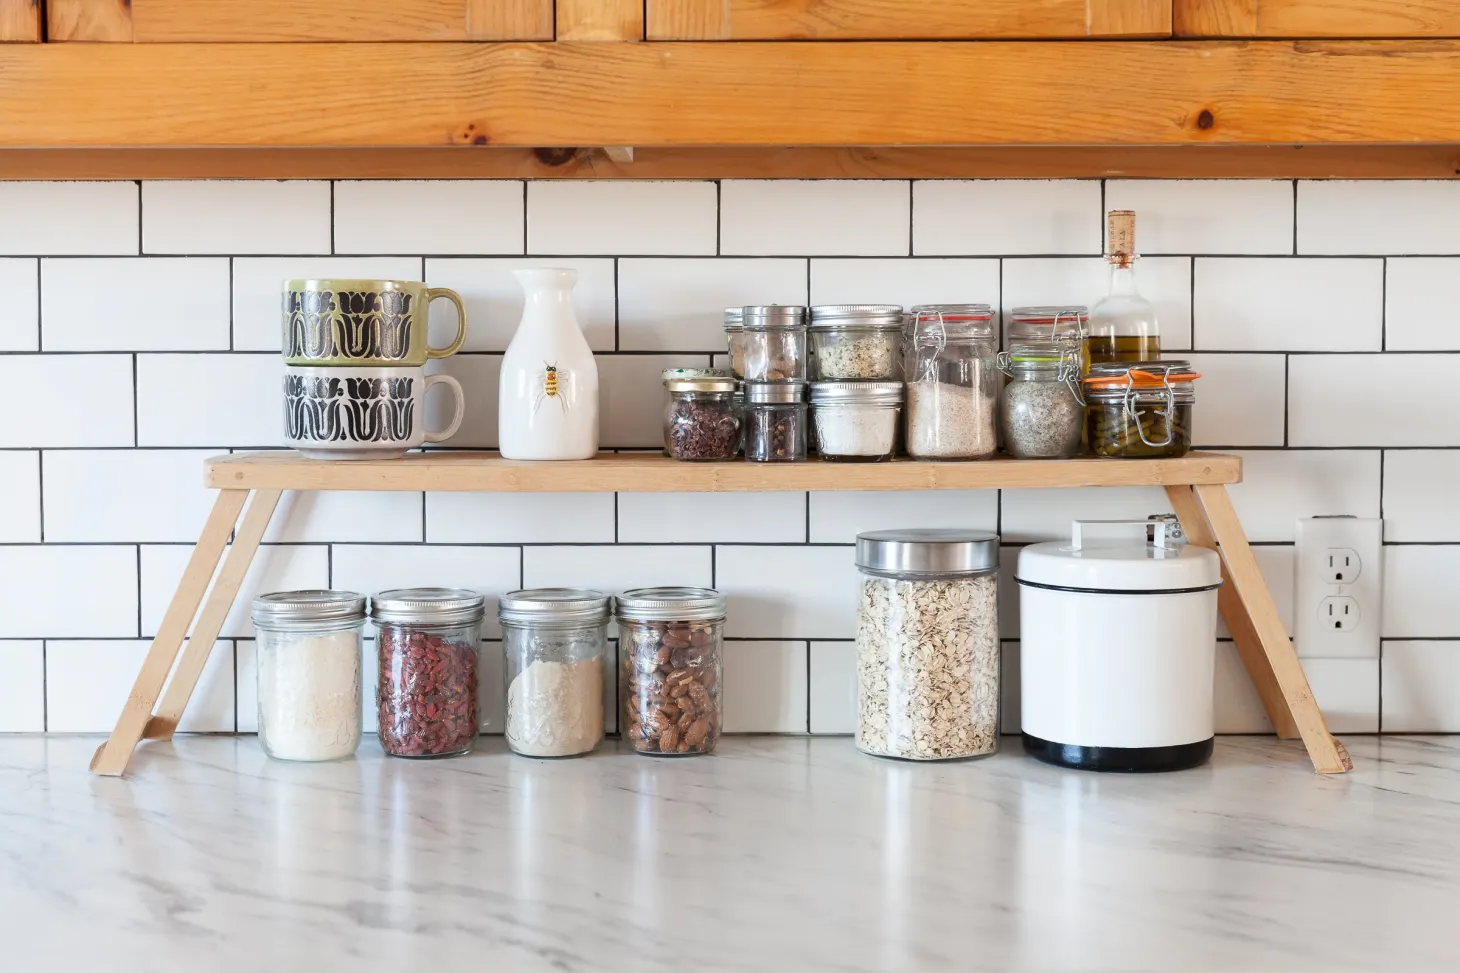 Kitchen Shelving Ideas: 14 Ways To Boost Storage And Display Space